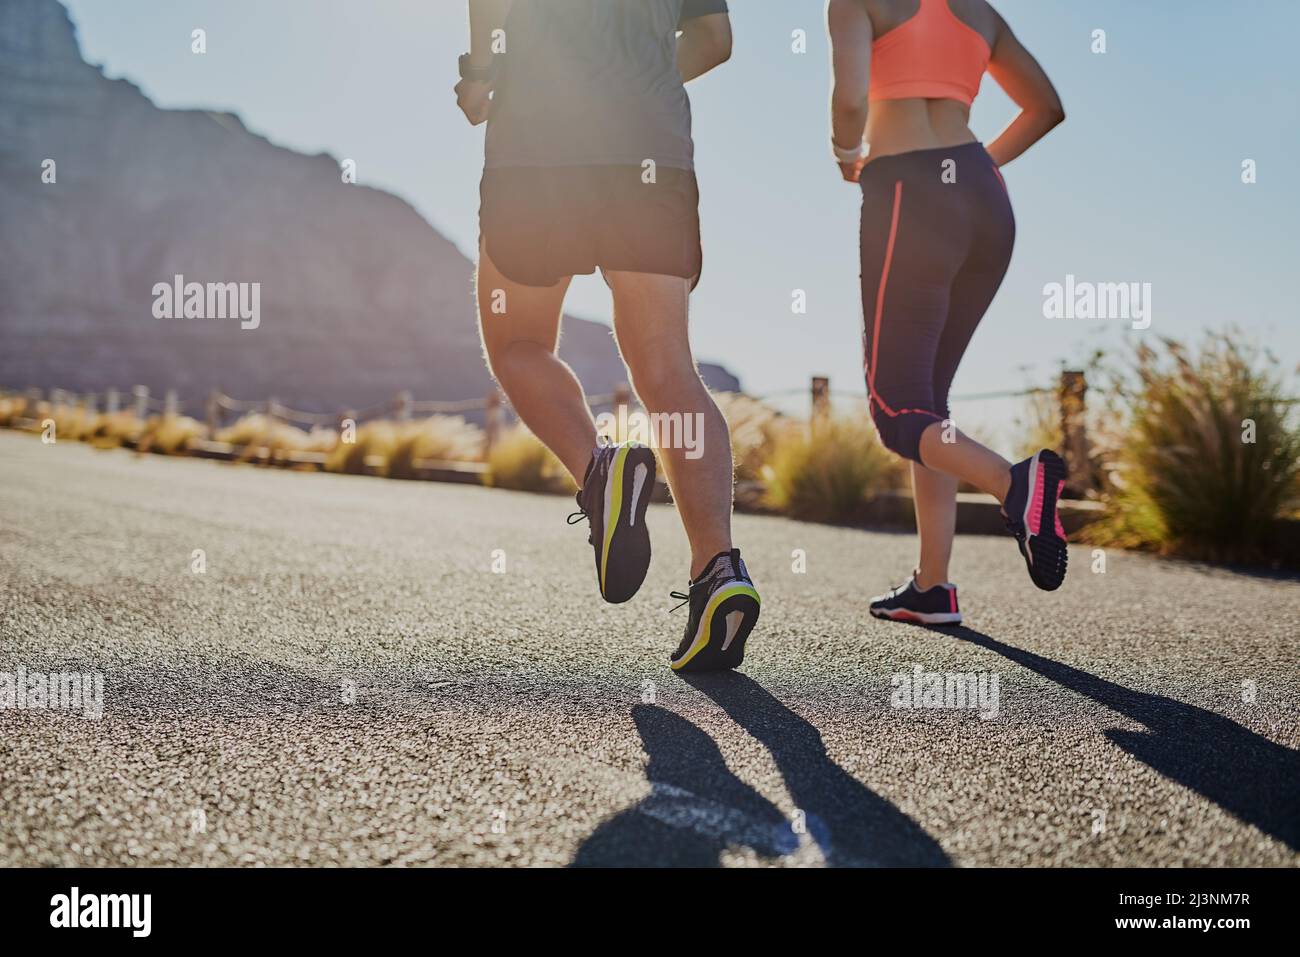 Working towards a better life. Rearview shot of two unrecognizable young people running on the road. Stock Photo